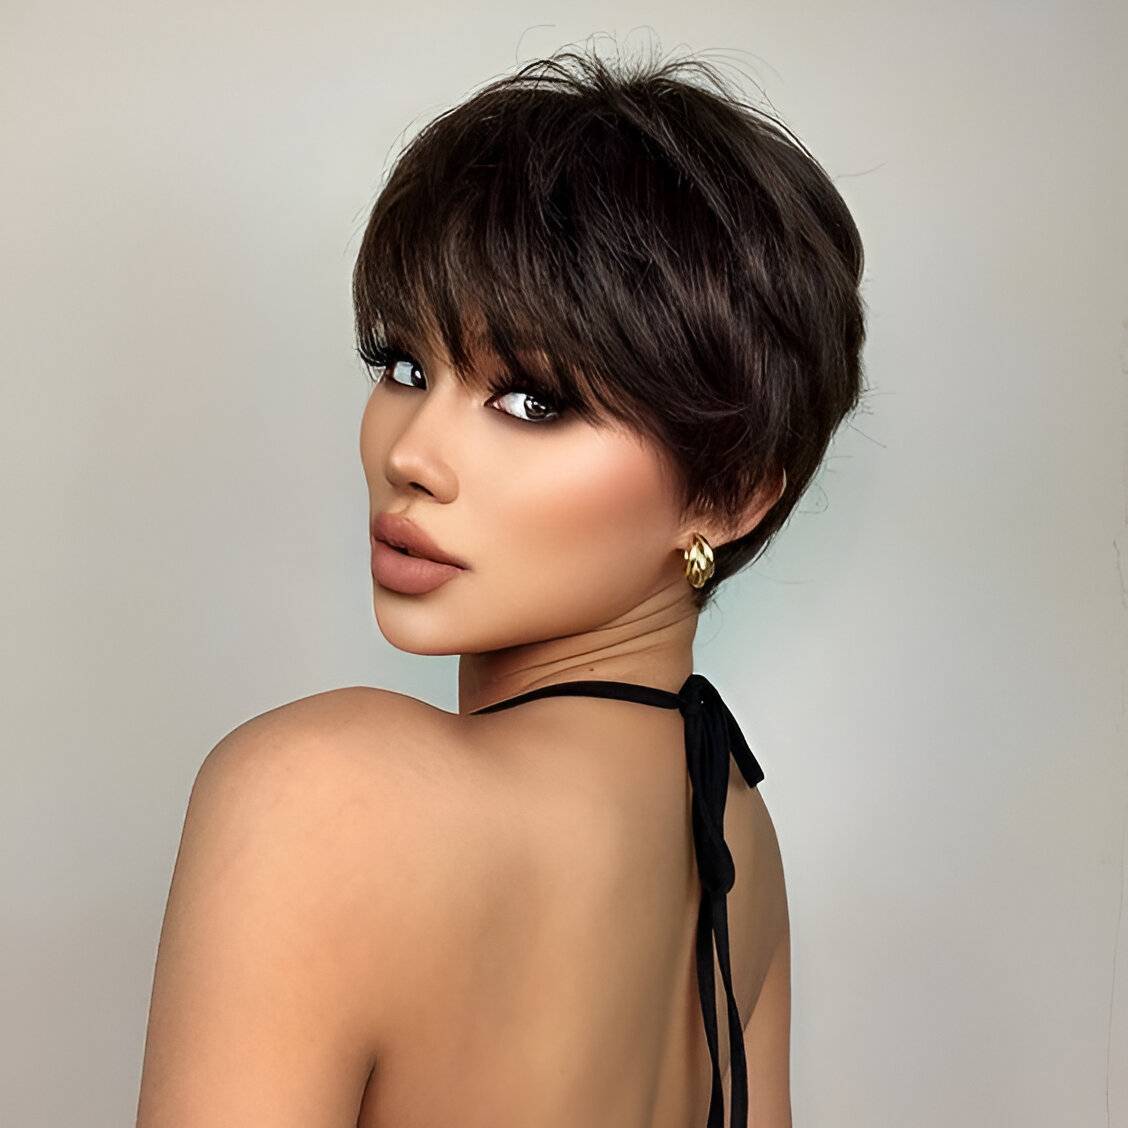 25 Trendiest Short Asymmetrical Haircuts For A Cool Chic Look - 209